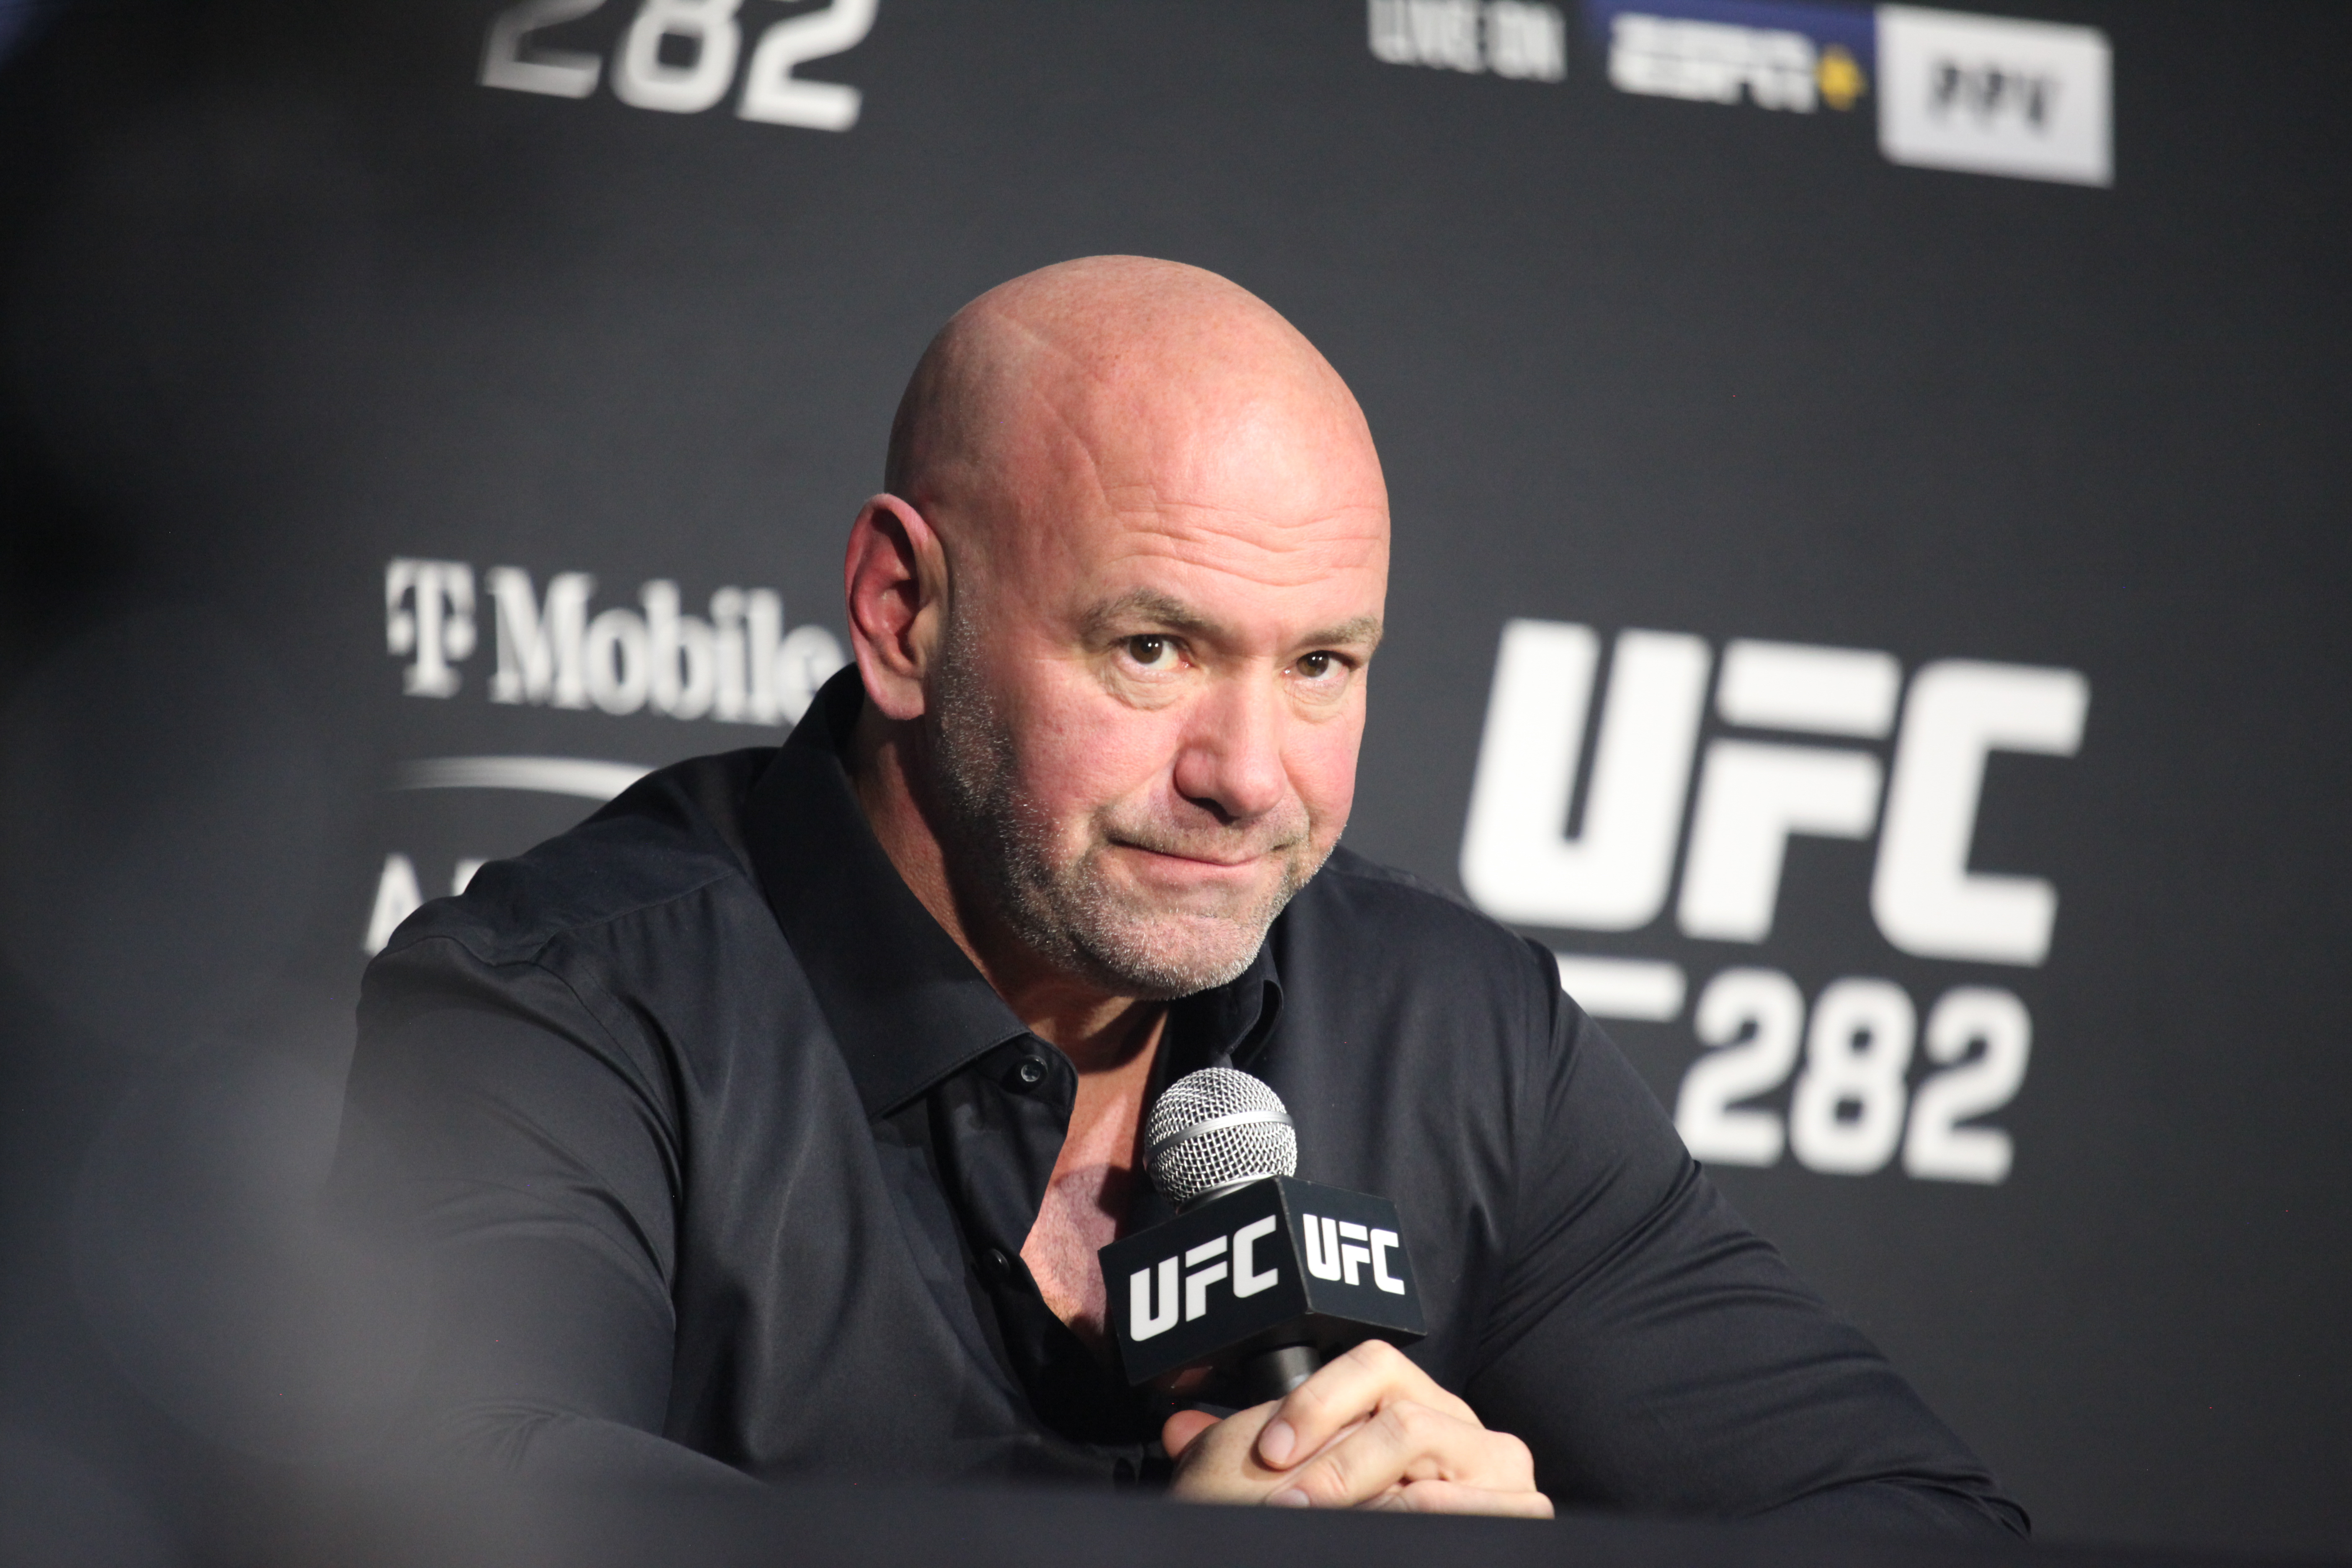 MMA: DEC 10 - UFCUFC president Dana White has not faced repercussions for slapping his wife, Anne, on New Year’s Eve 282